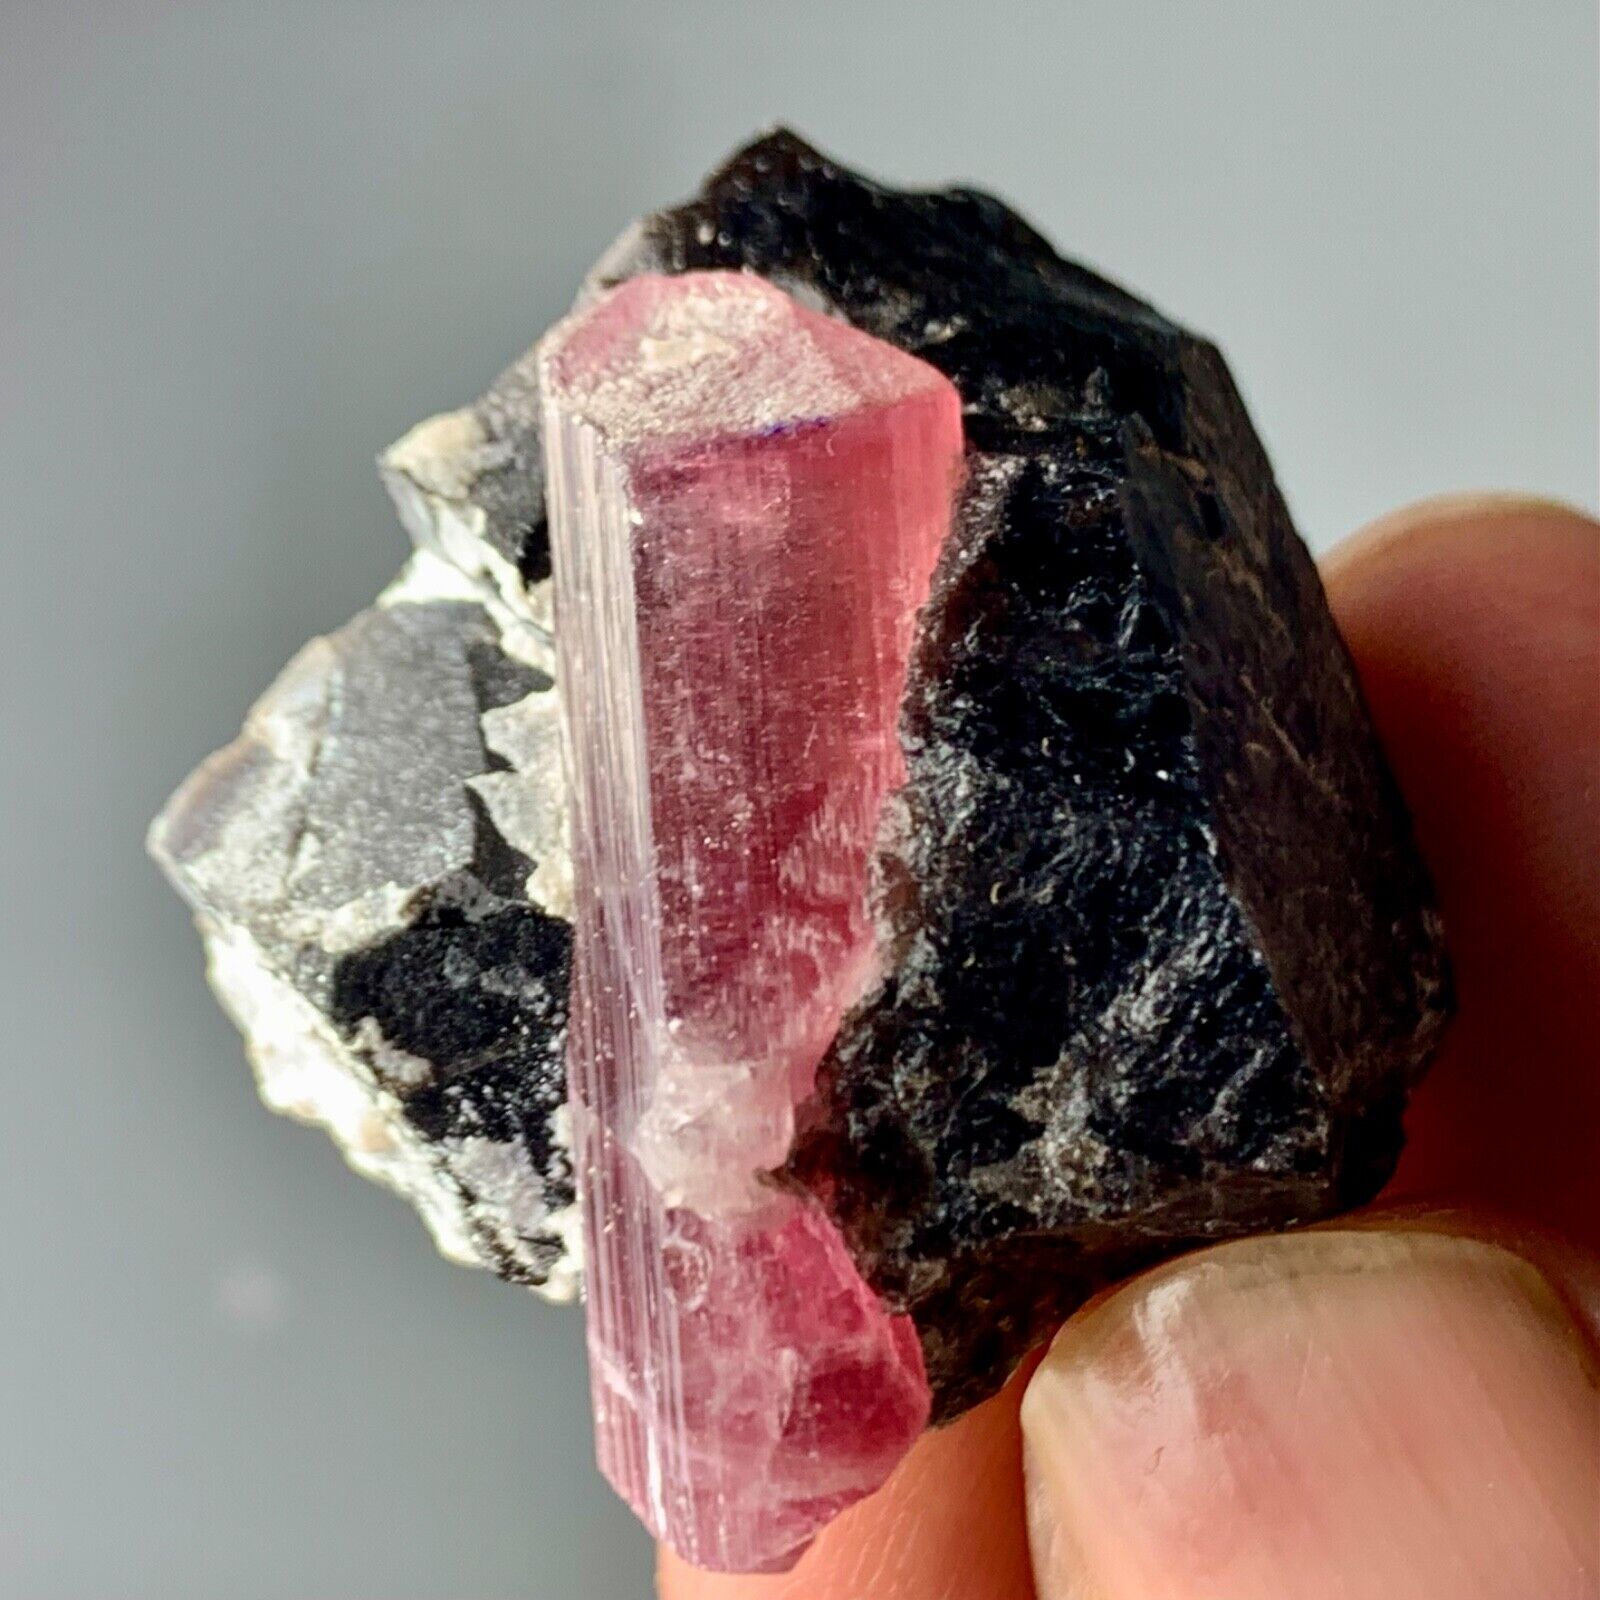 151 Cts Beautiful Terminated pink Tourmaline Crystal With Quartzfrom Afghanistan